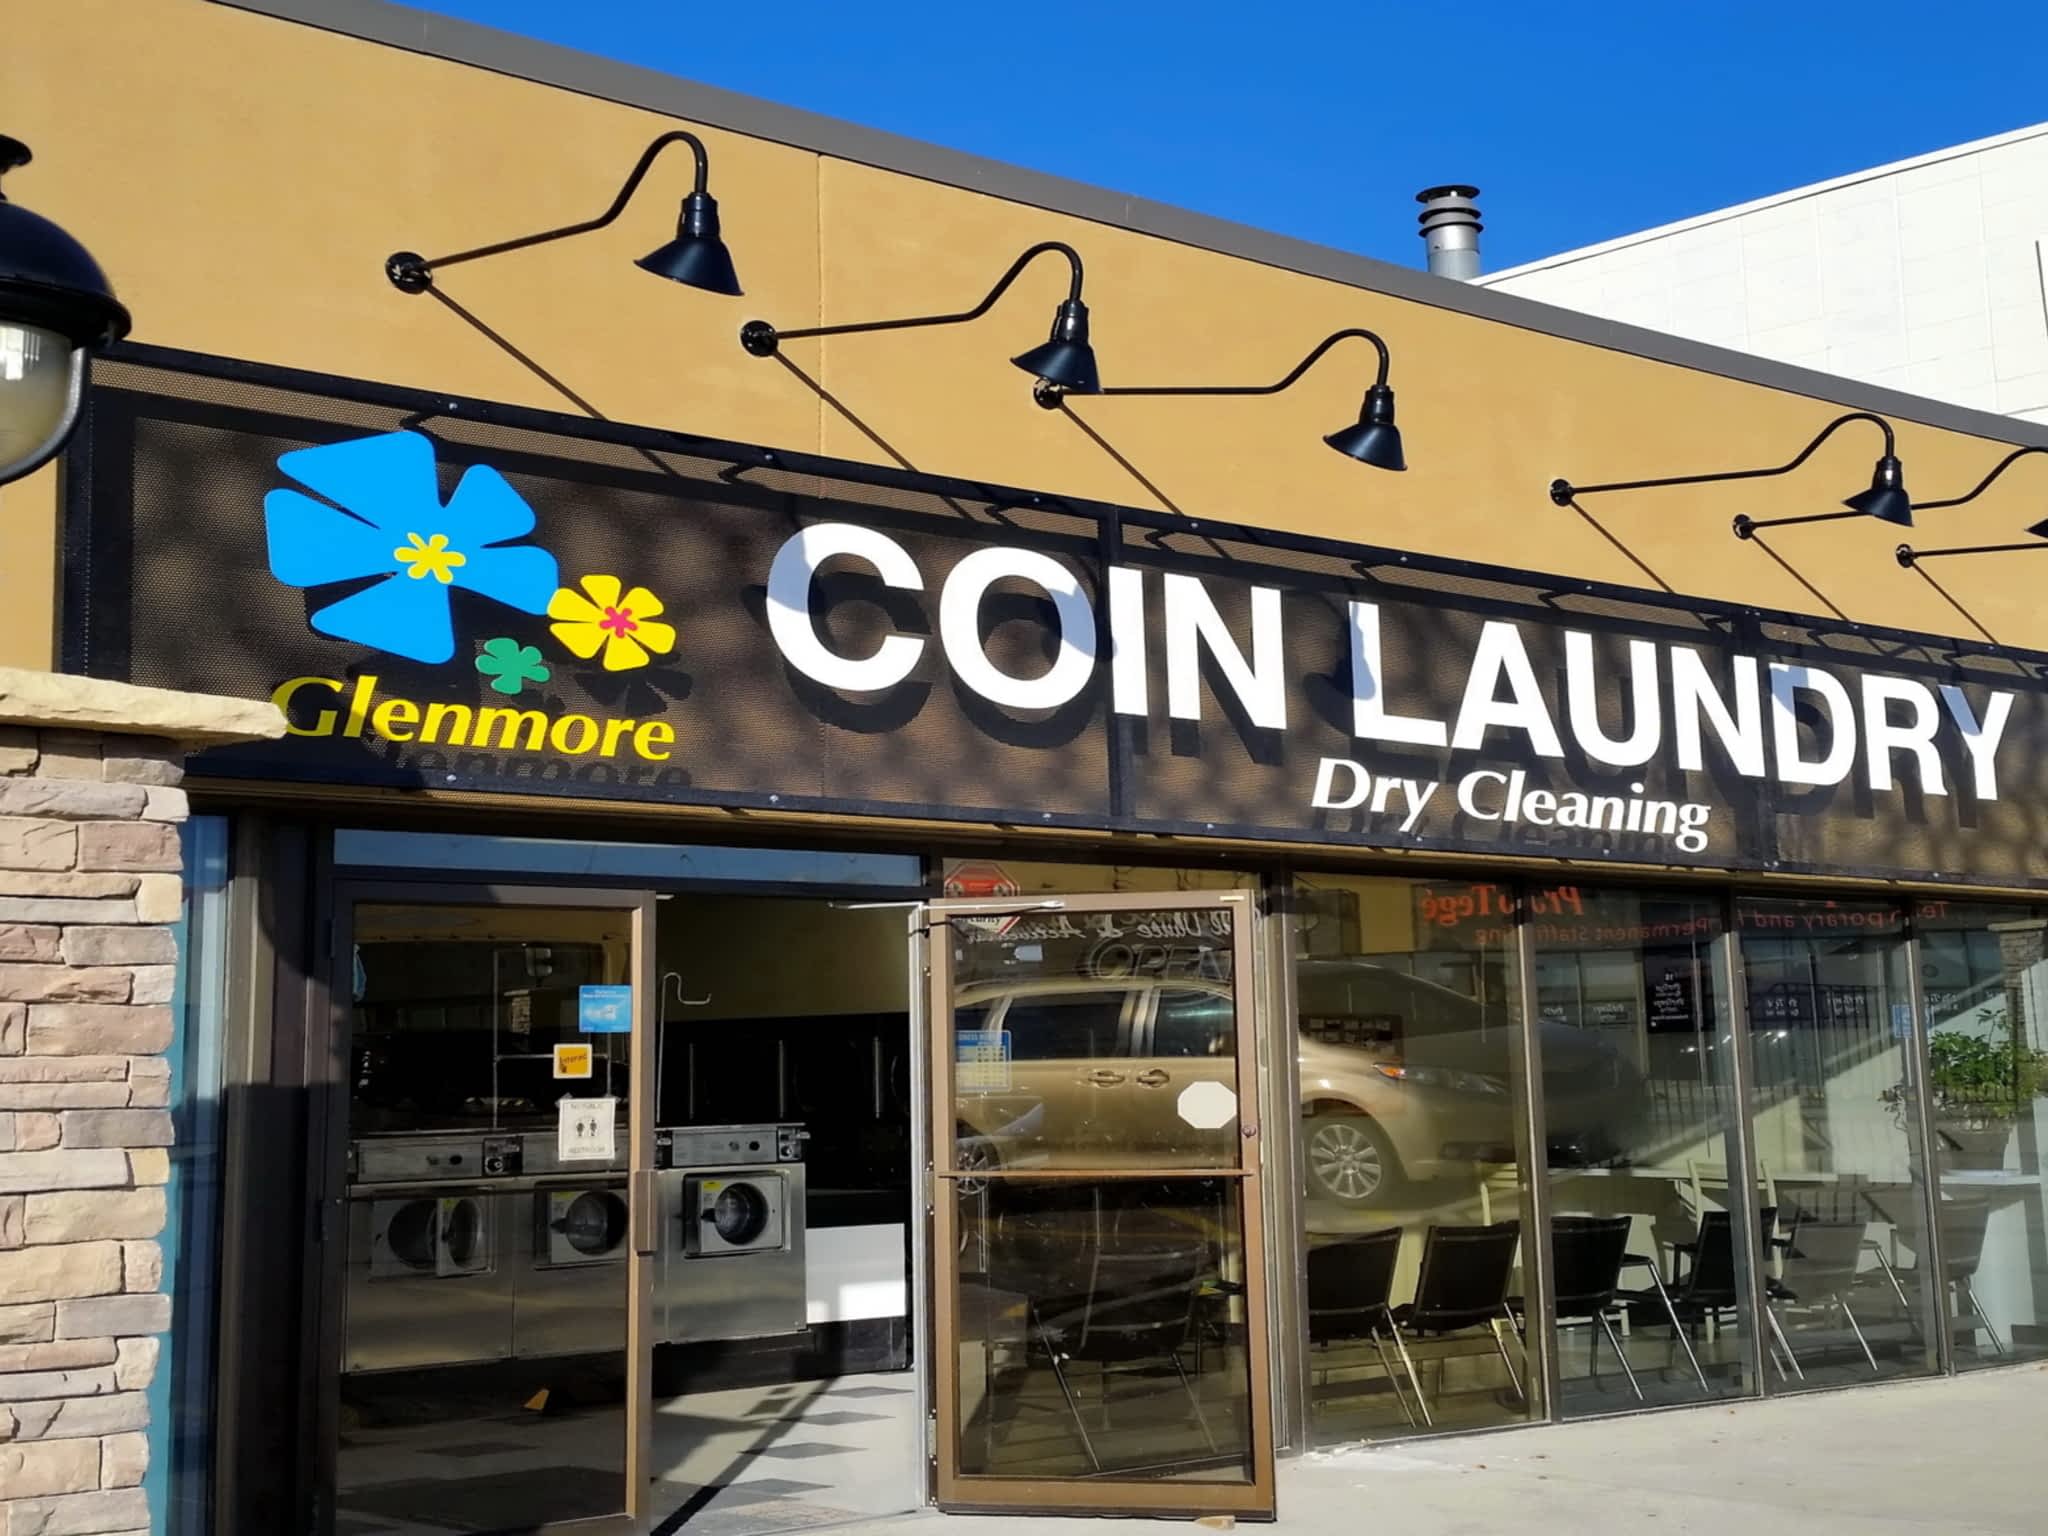 photo Glenmore Coin Laundry & Dry Cleaning